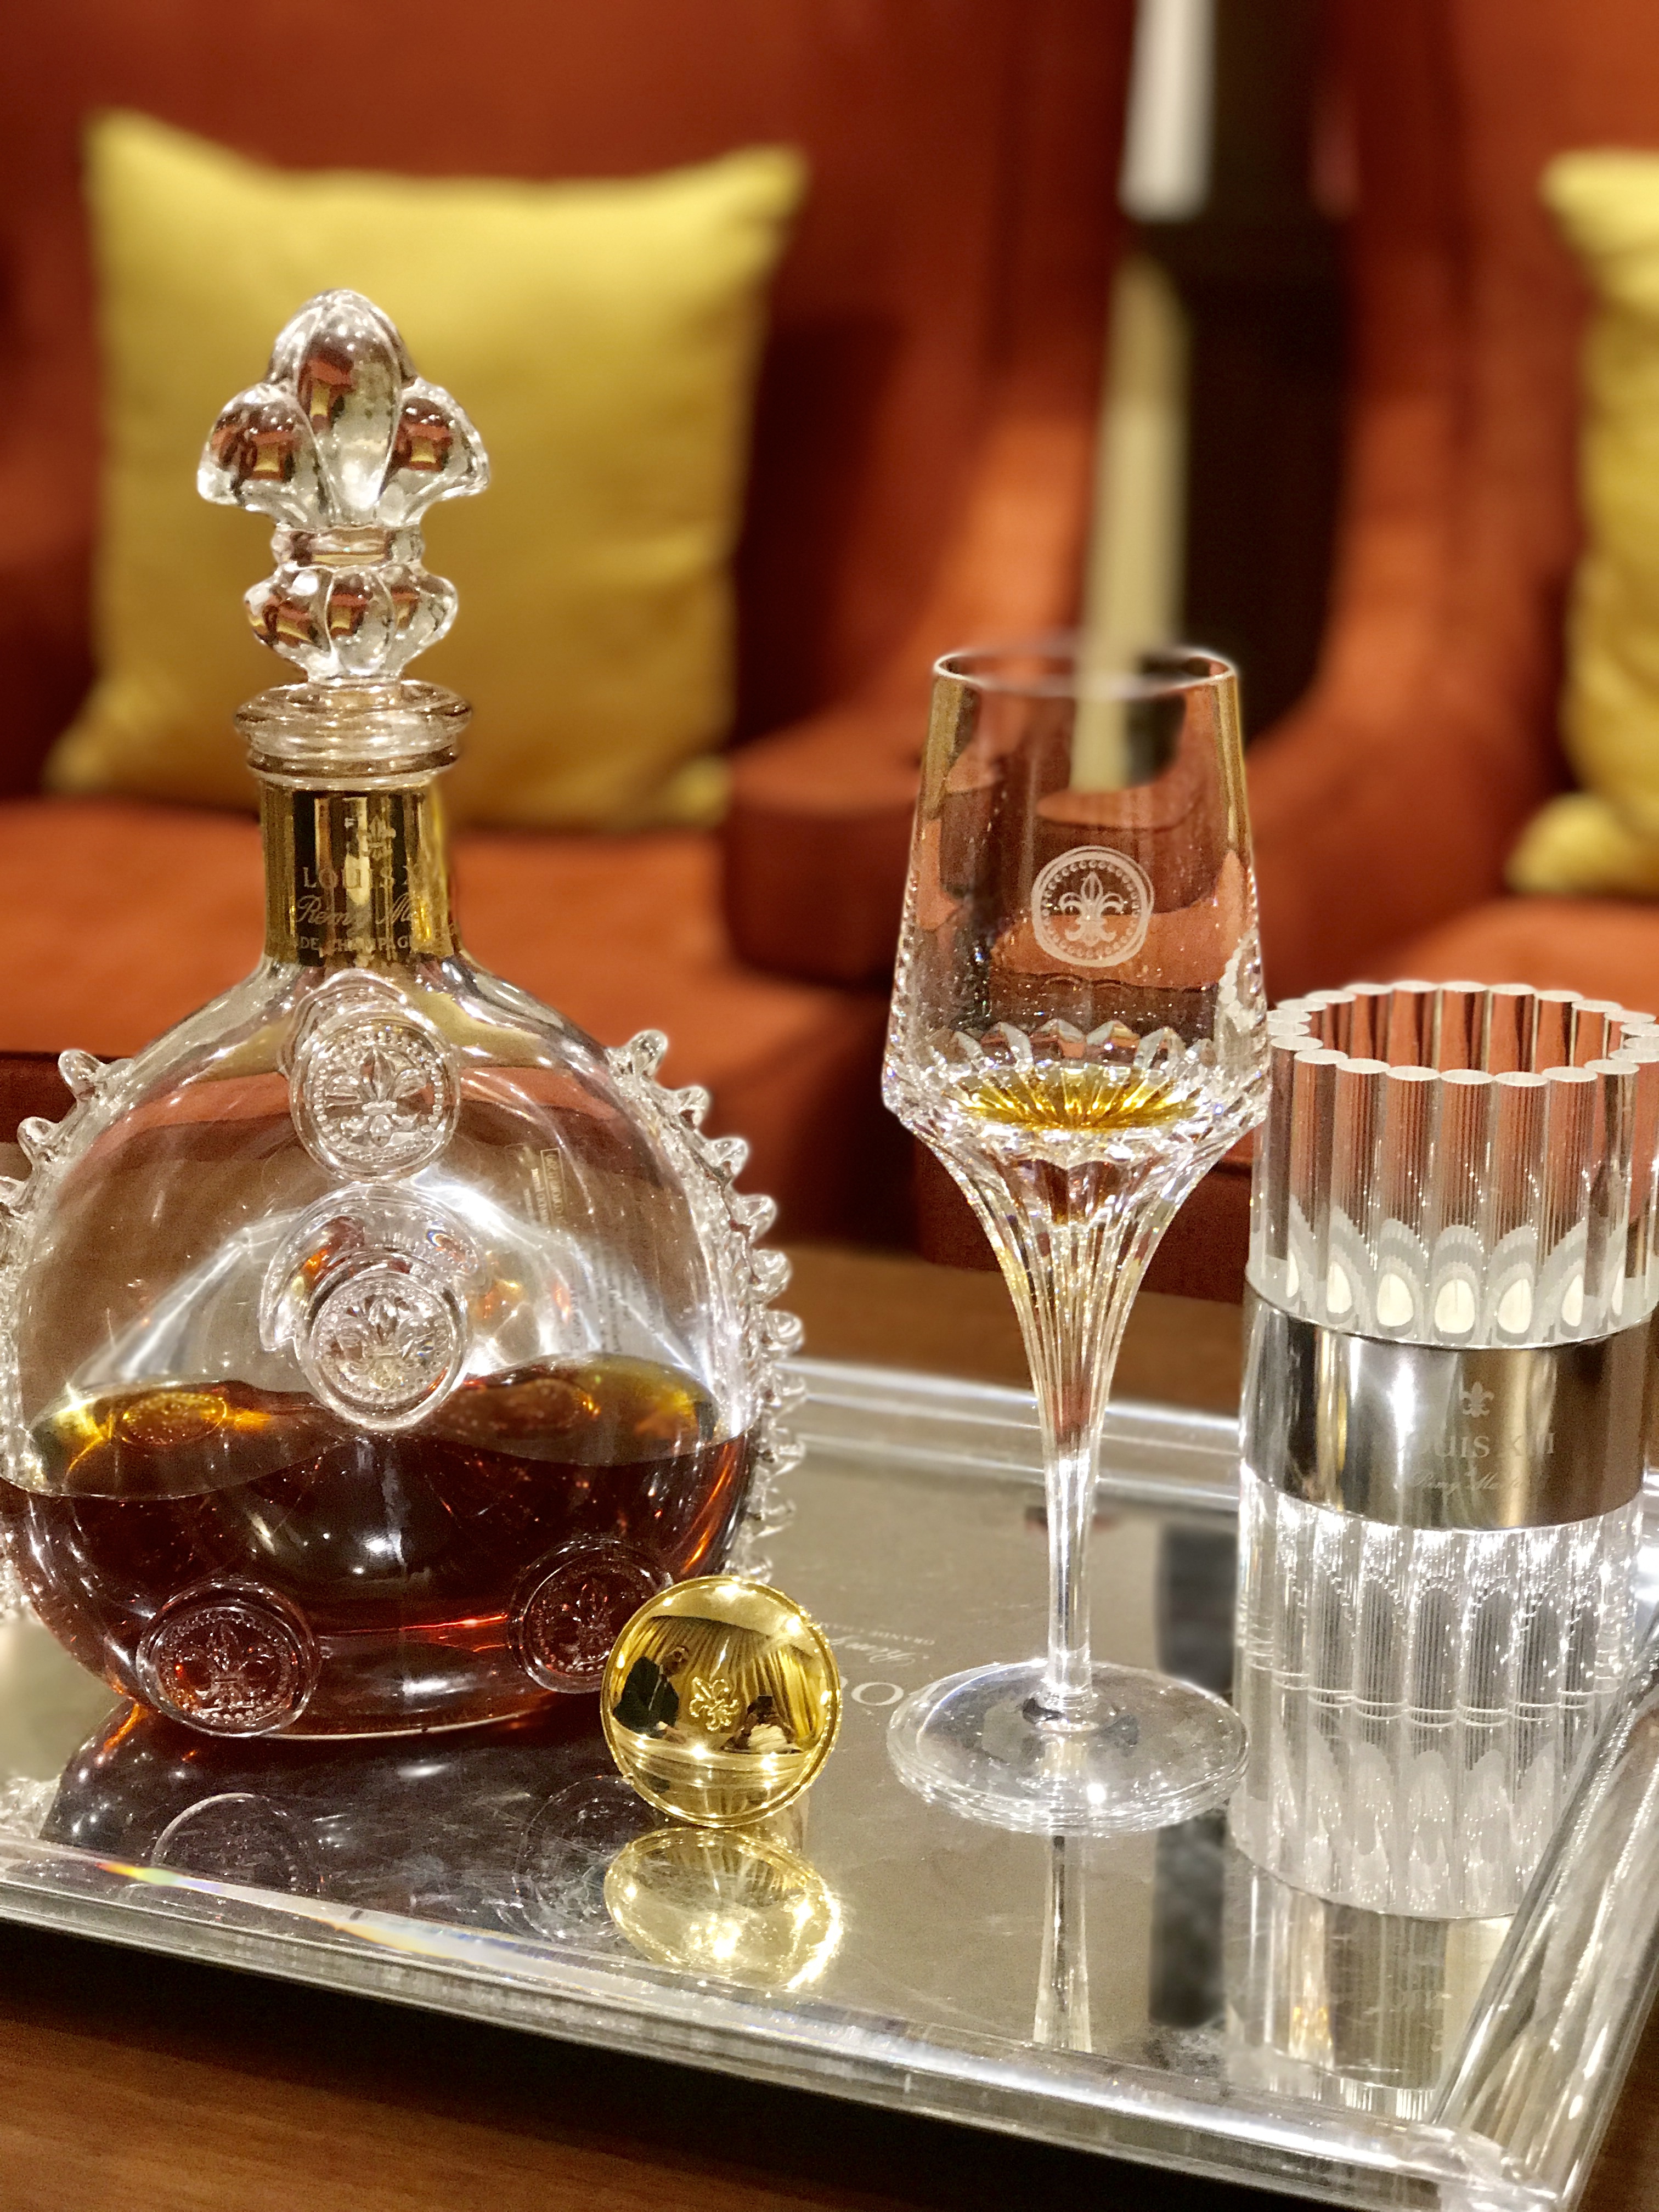 That's the spirit: Hotel lines up a shot of rare Remy Louis XIII